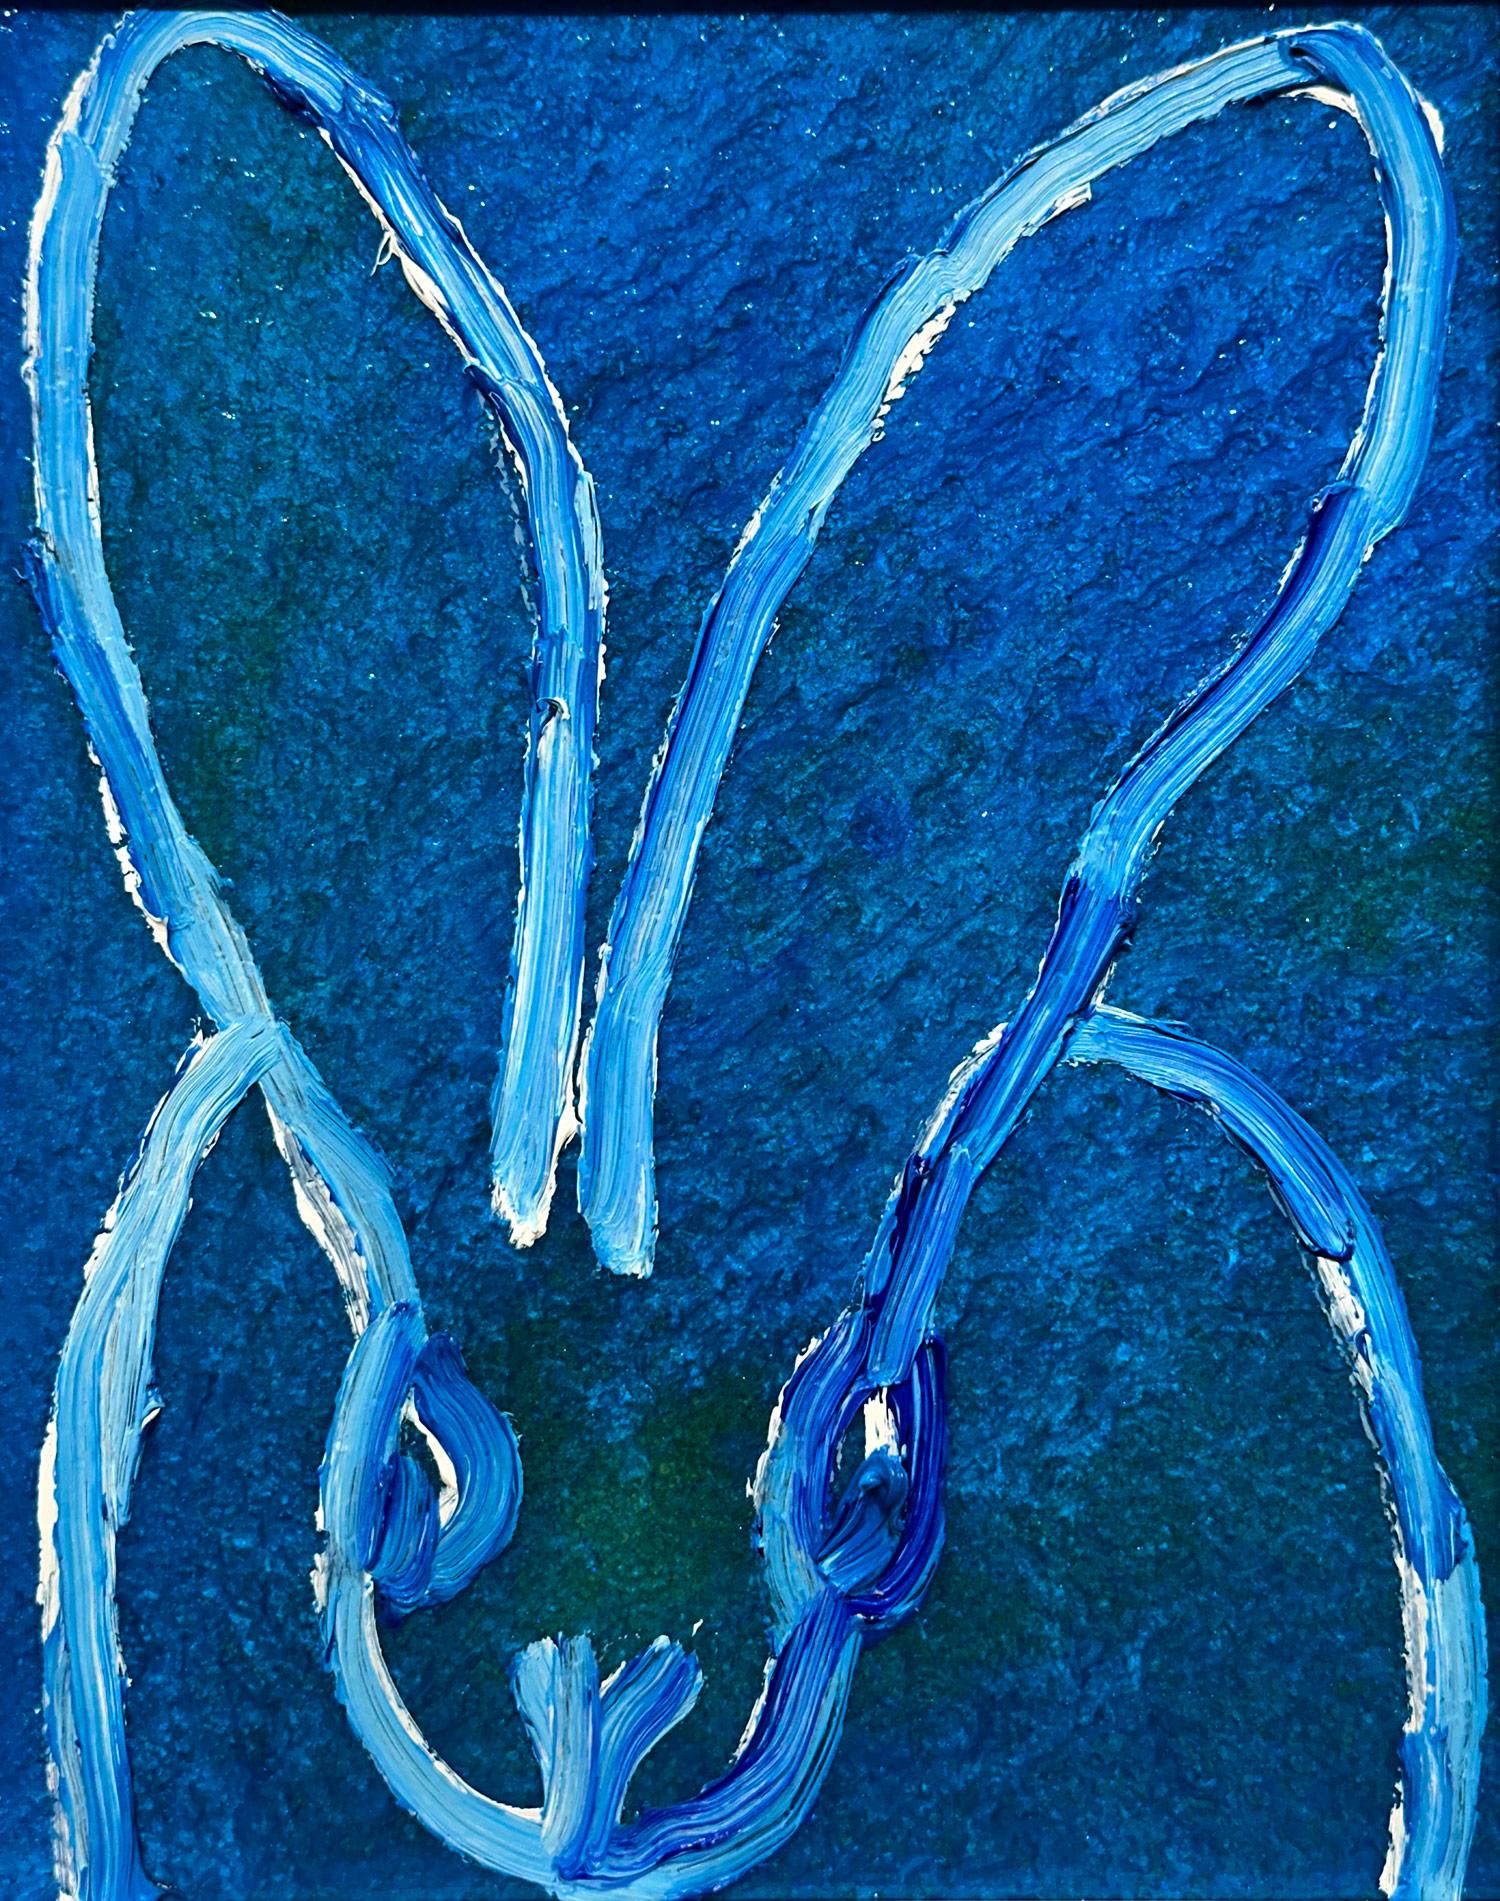 A wonderful composition of one of Slonem's most iconic subjects, Bunnies. This piece depicts a gestural figure of a white bunny on a Sapphire Blue background with thick use of paint. It is housed in a wonderful simple white contemporary wood frame.